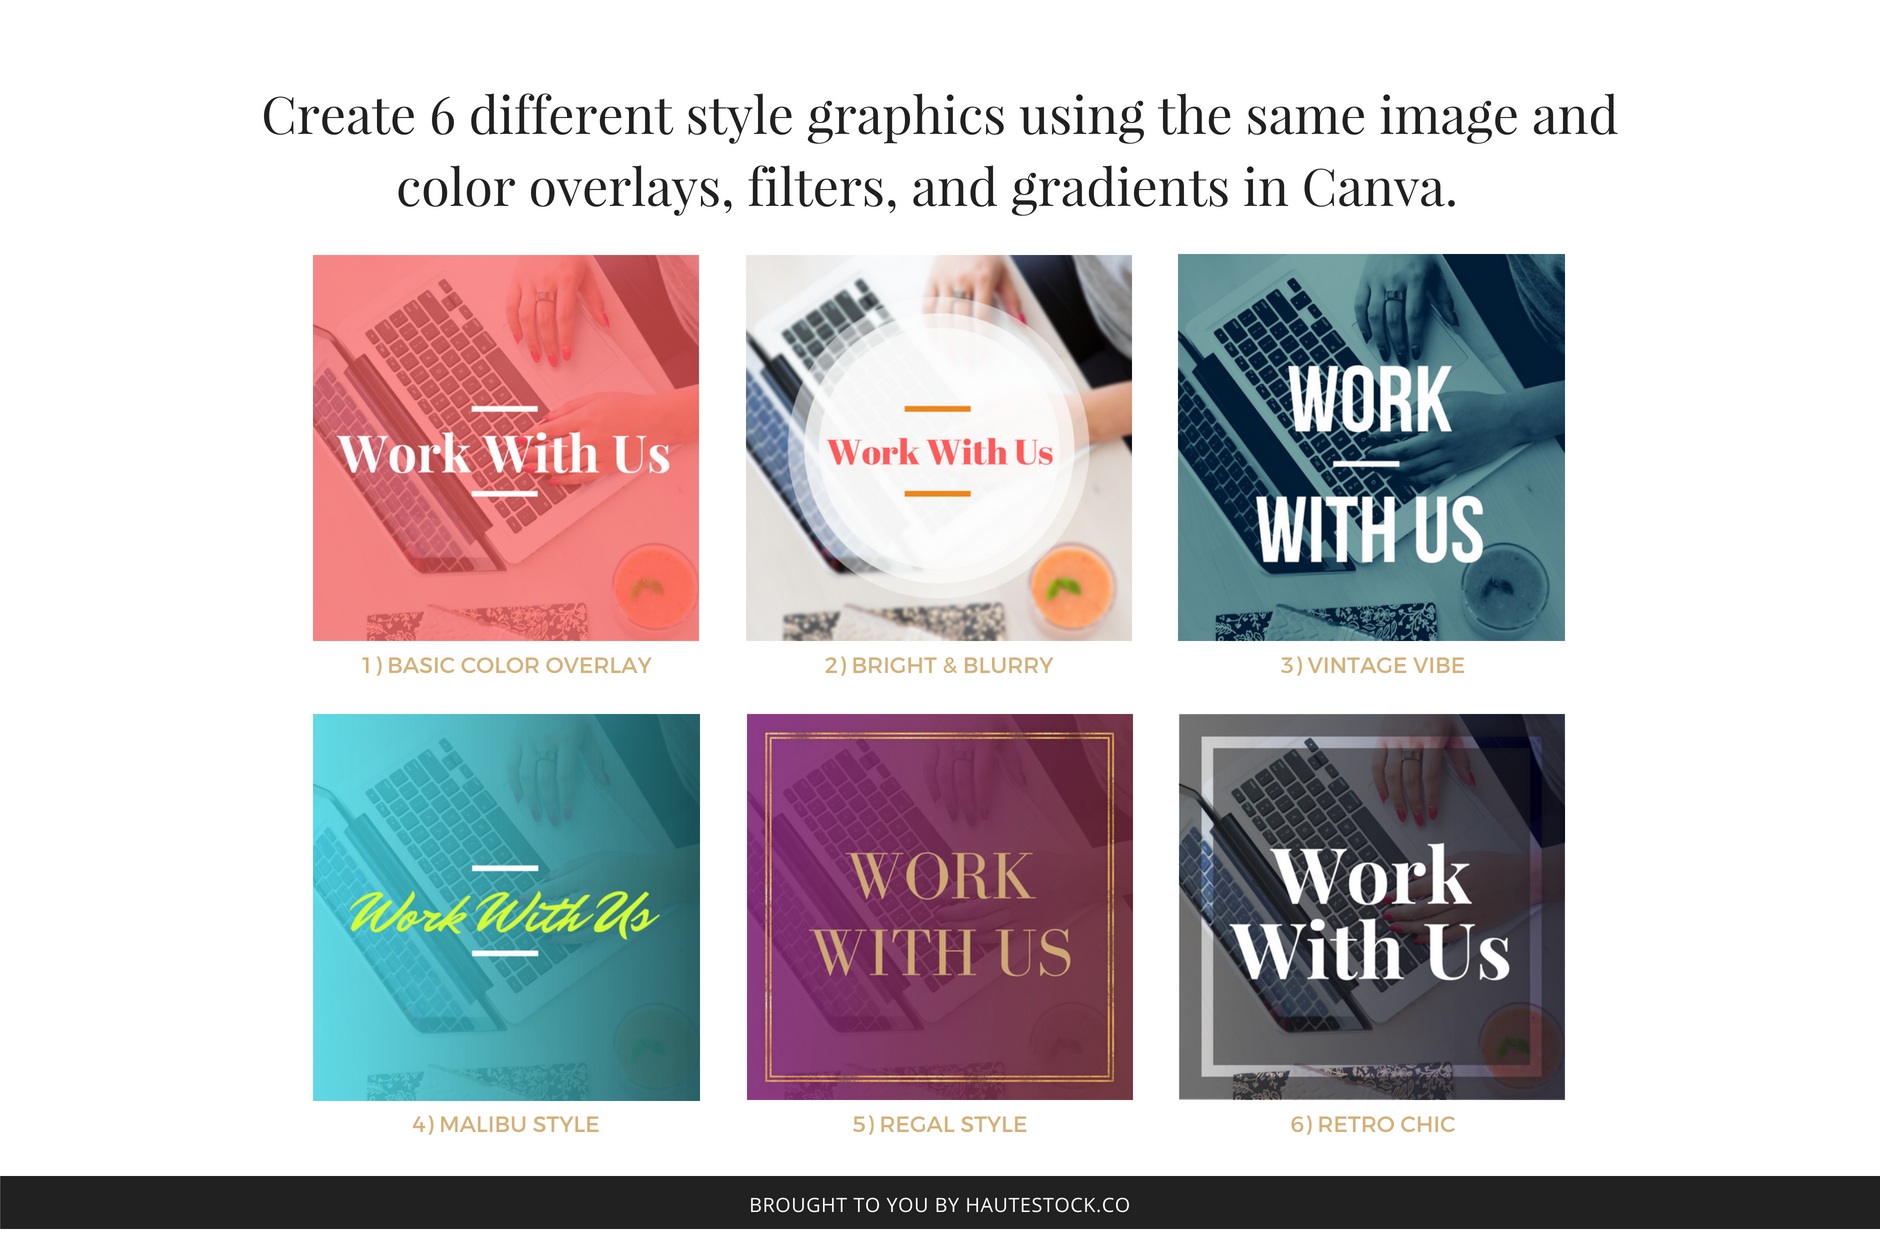 Six different ways to use color overlays, filters, and gradients in Canva to personalize the same Haute Stock photo to create unique graphics.